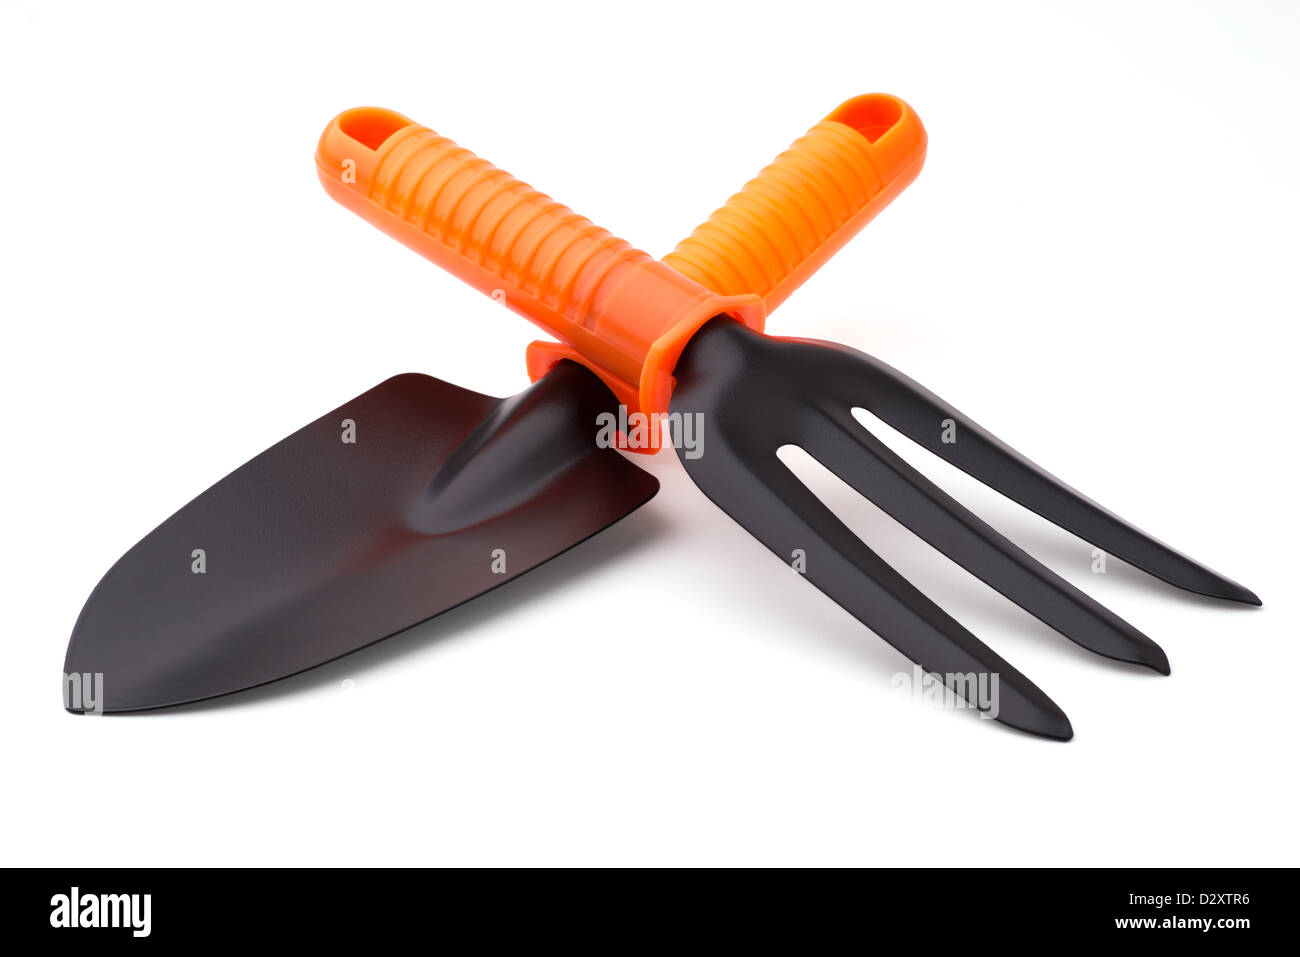 Gardening: trowel and digging fork, isolated on white background Stock Photo